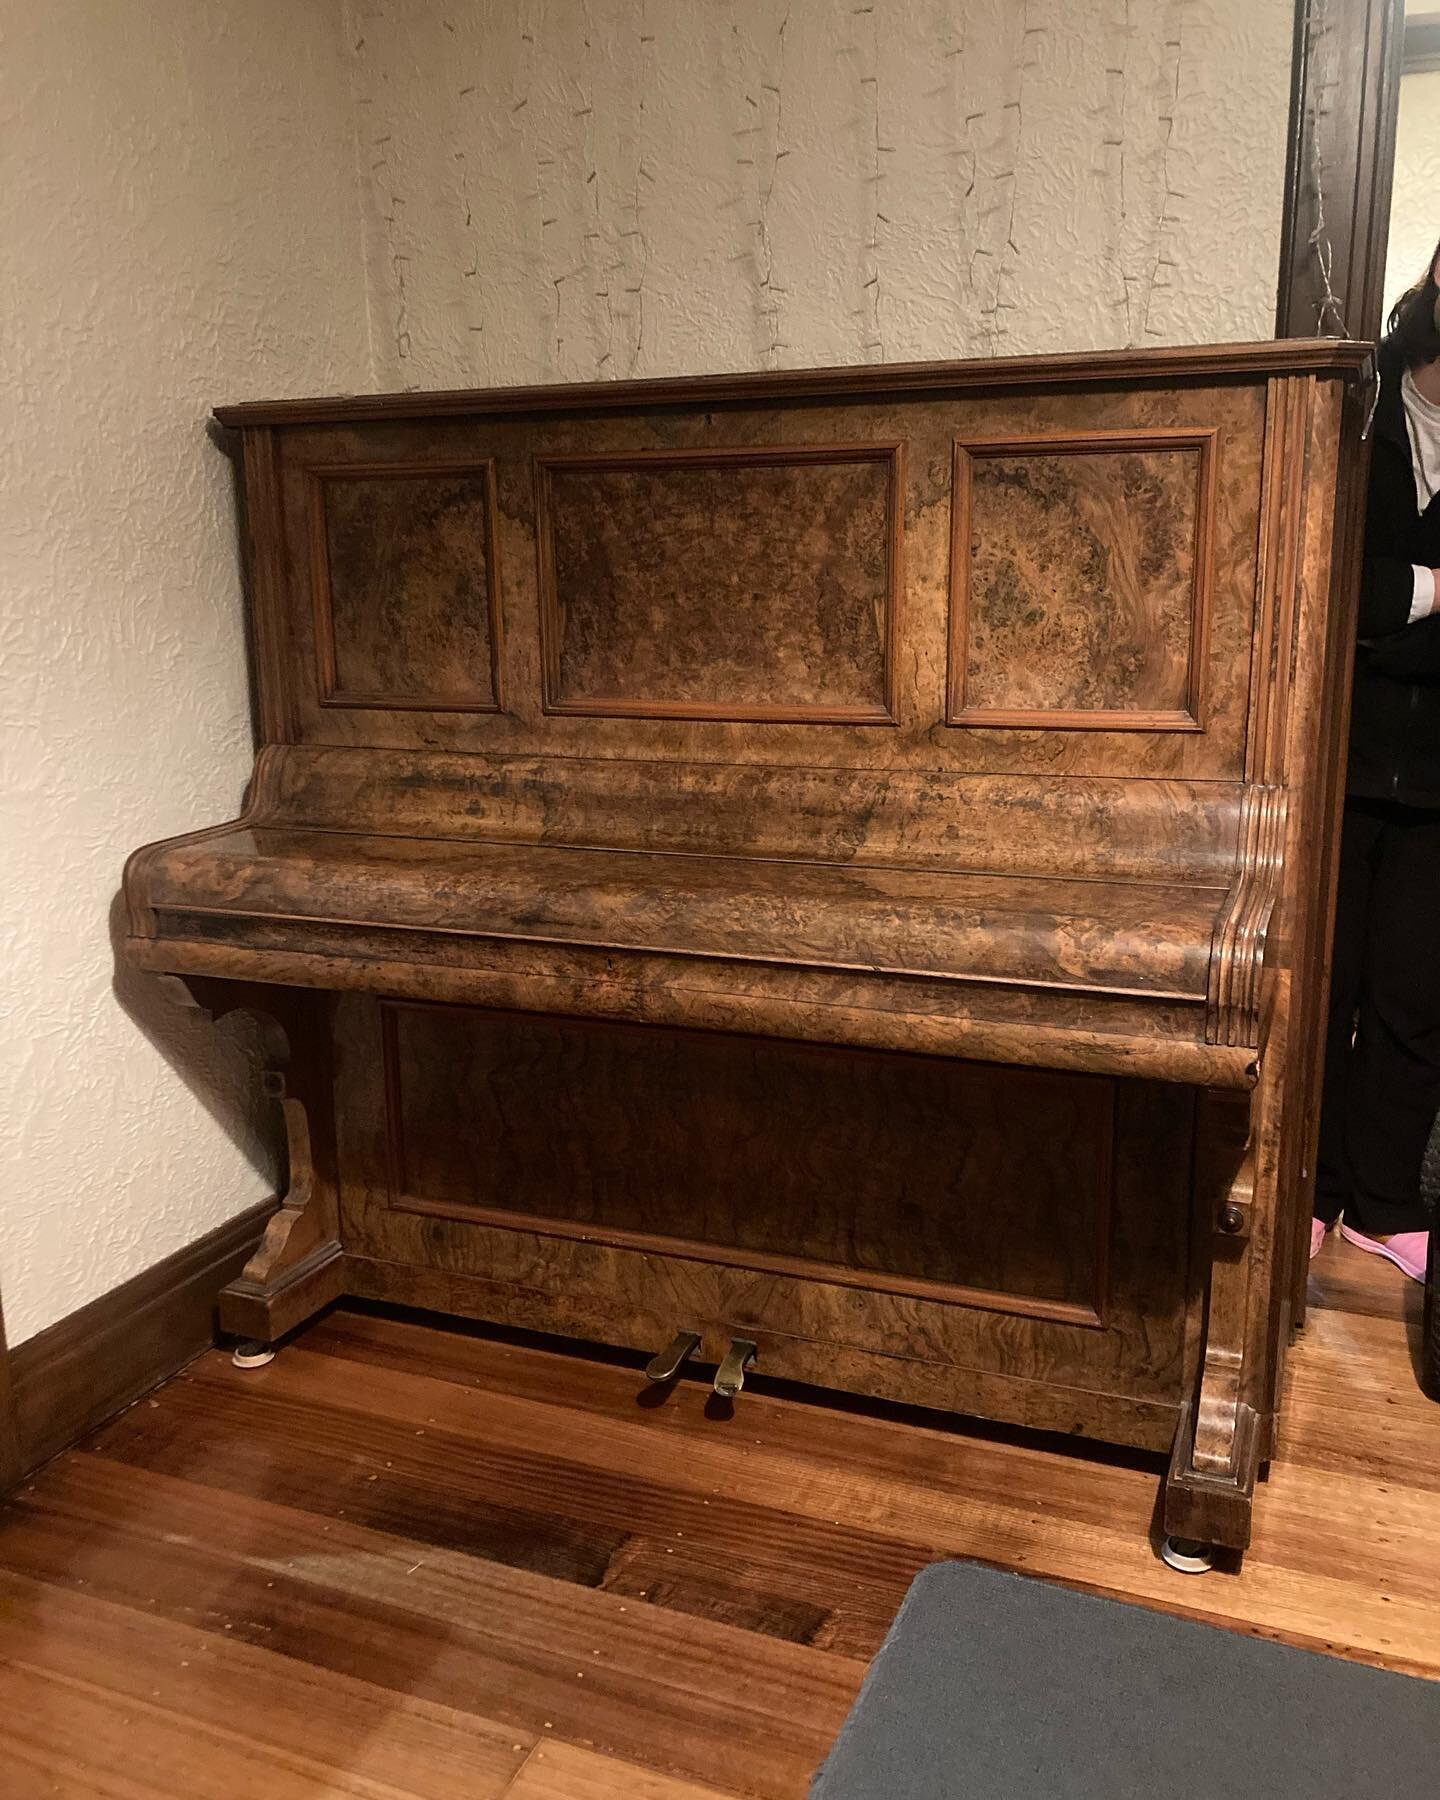 ITS PIANO-O-CLOCK. Who wants this goanna? Free to a good home. Delivery only to Castlemaine region. Send us a message if you&rsquo;re keen to get your chops up on some Chopin